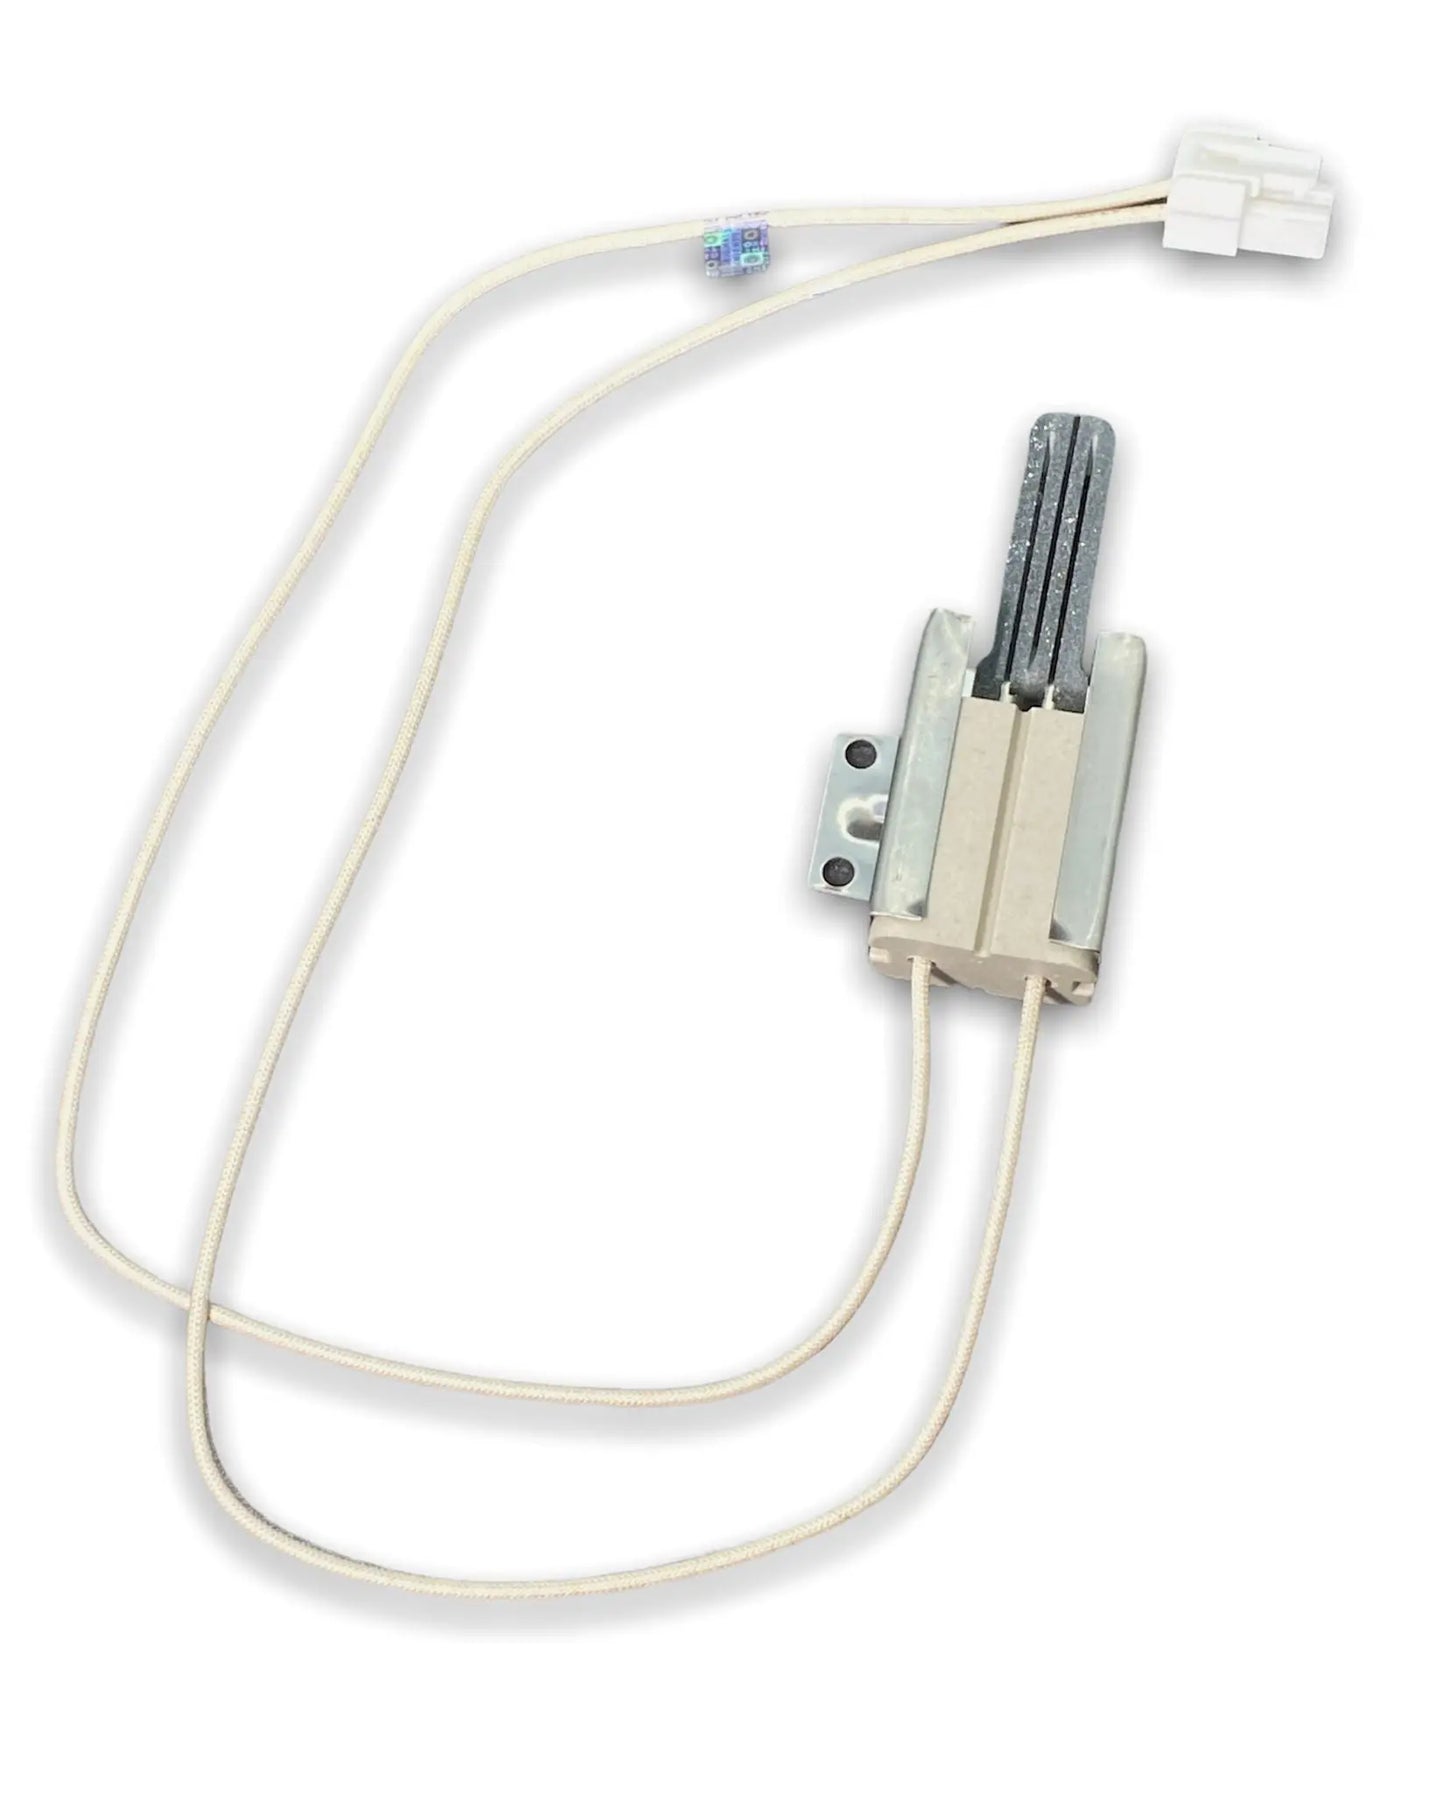 Electrolux Range Flat Gas Igniter, Hot Surface - 316489403 or 7316489403 , REPLACES: 5304508786 PD00000756 1513415 AP4433236 PS2364063 EAP2364063 501RB INVERTEC